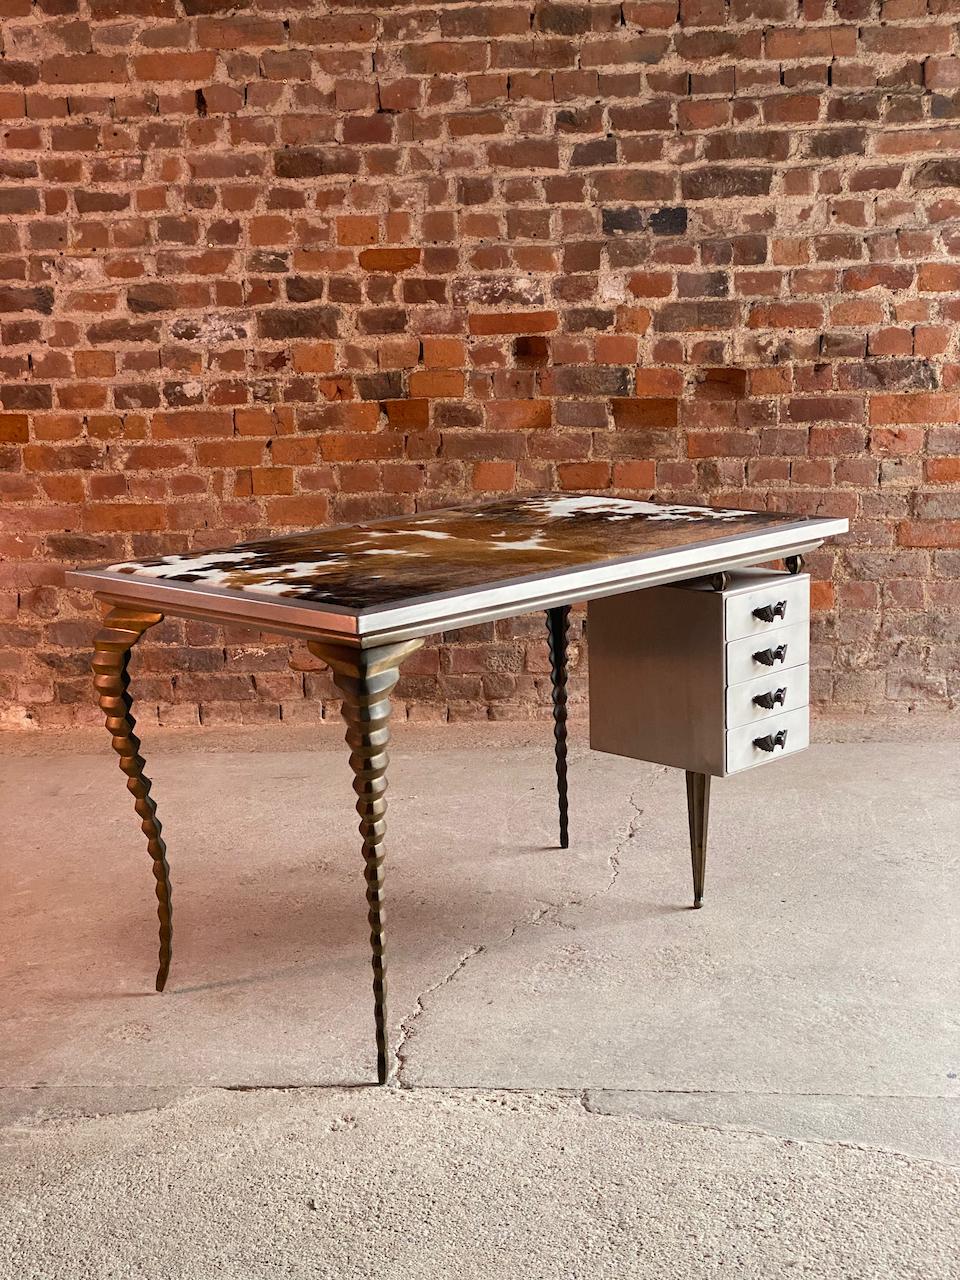 Mark Brazier-Jones ‘Flightfile’ writing desk limited edition Signed & Dated 1996

Magnificent Limited Edition twentieth century Mark Brazier-Jones ‘Flightfile’ Writing Desk executed in 1996, the inset rectangular copper top covered in genuine